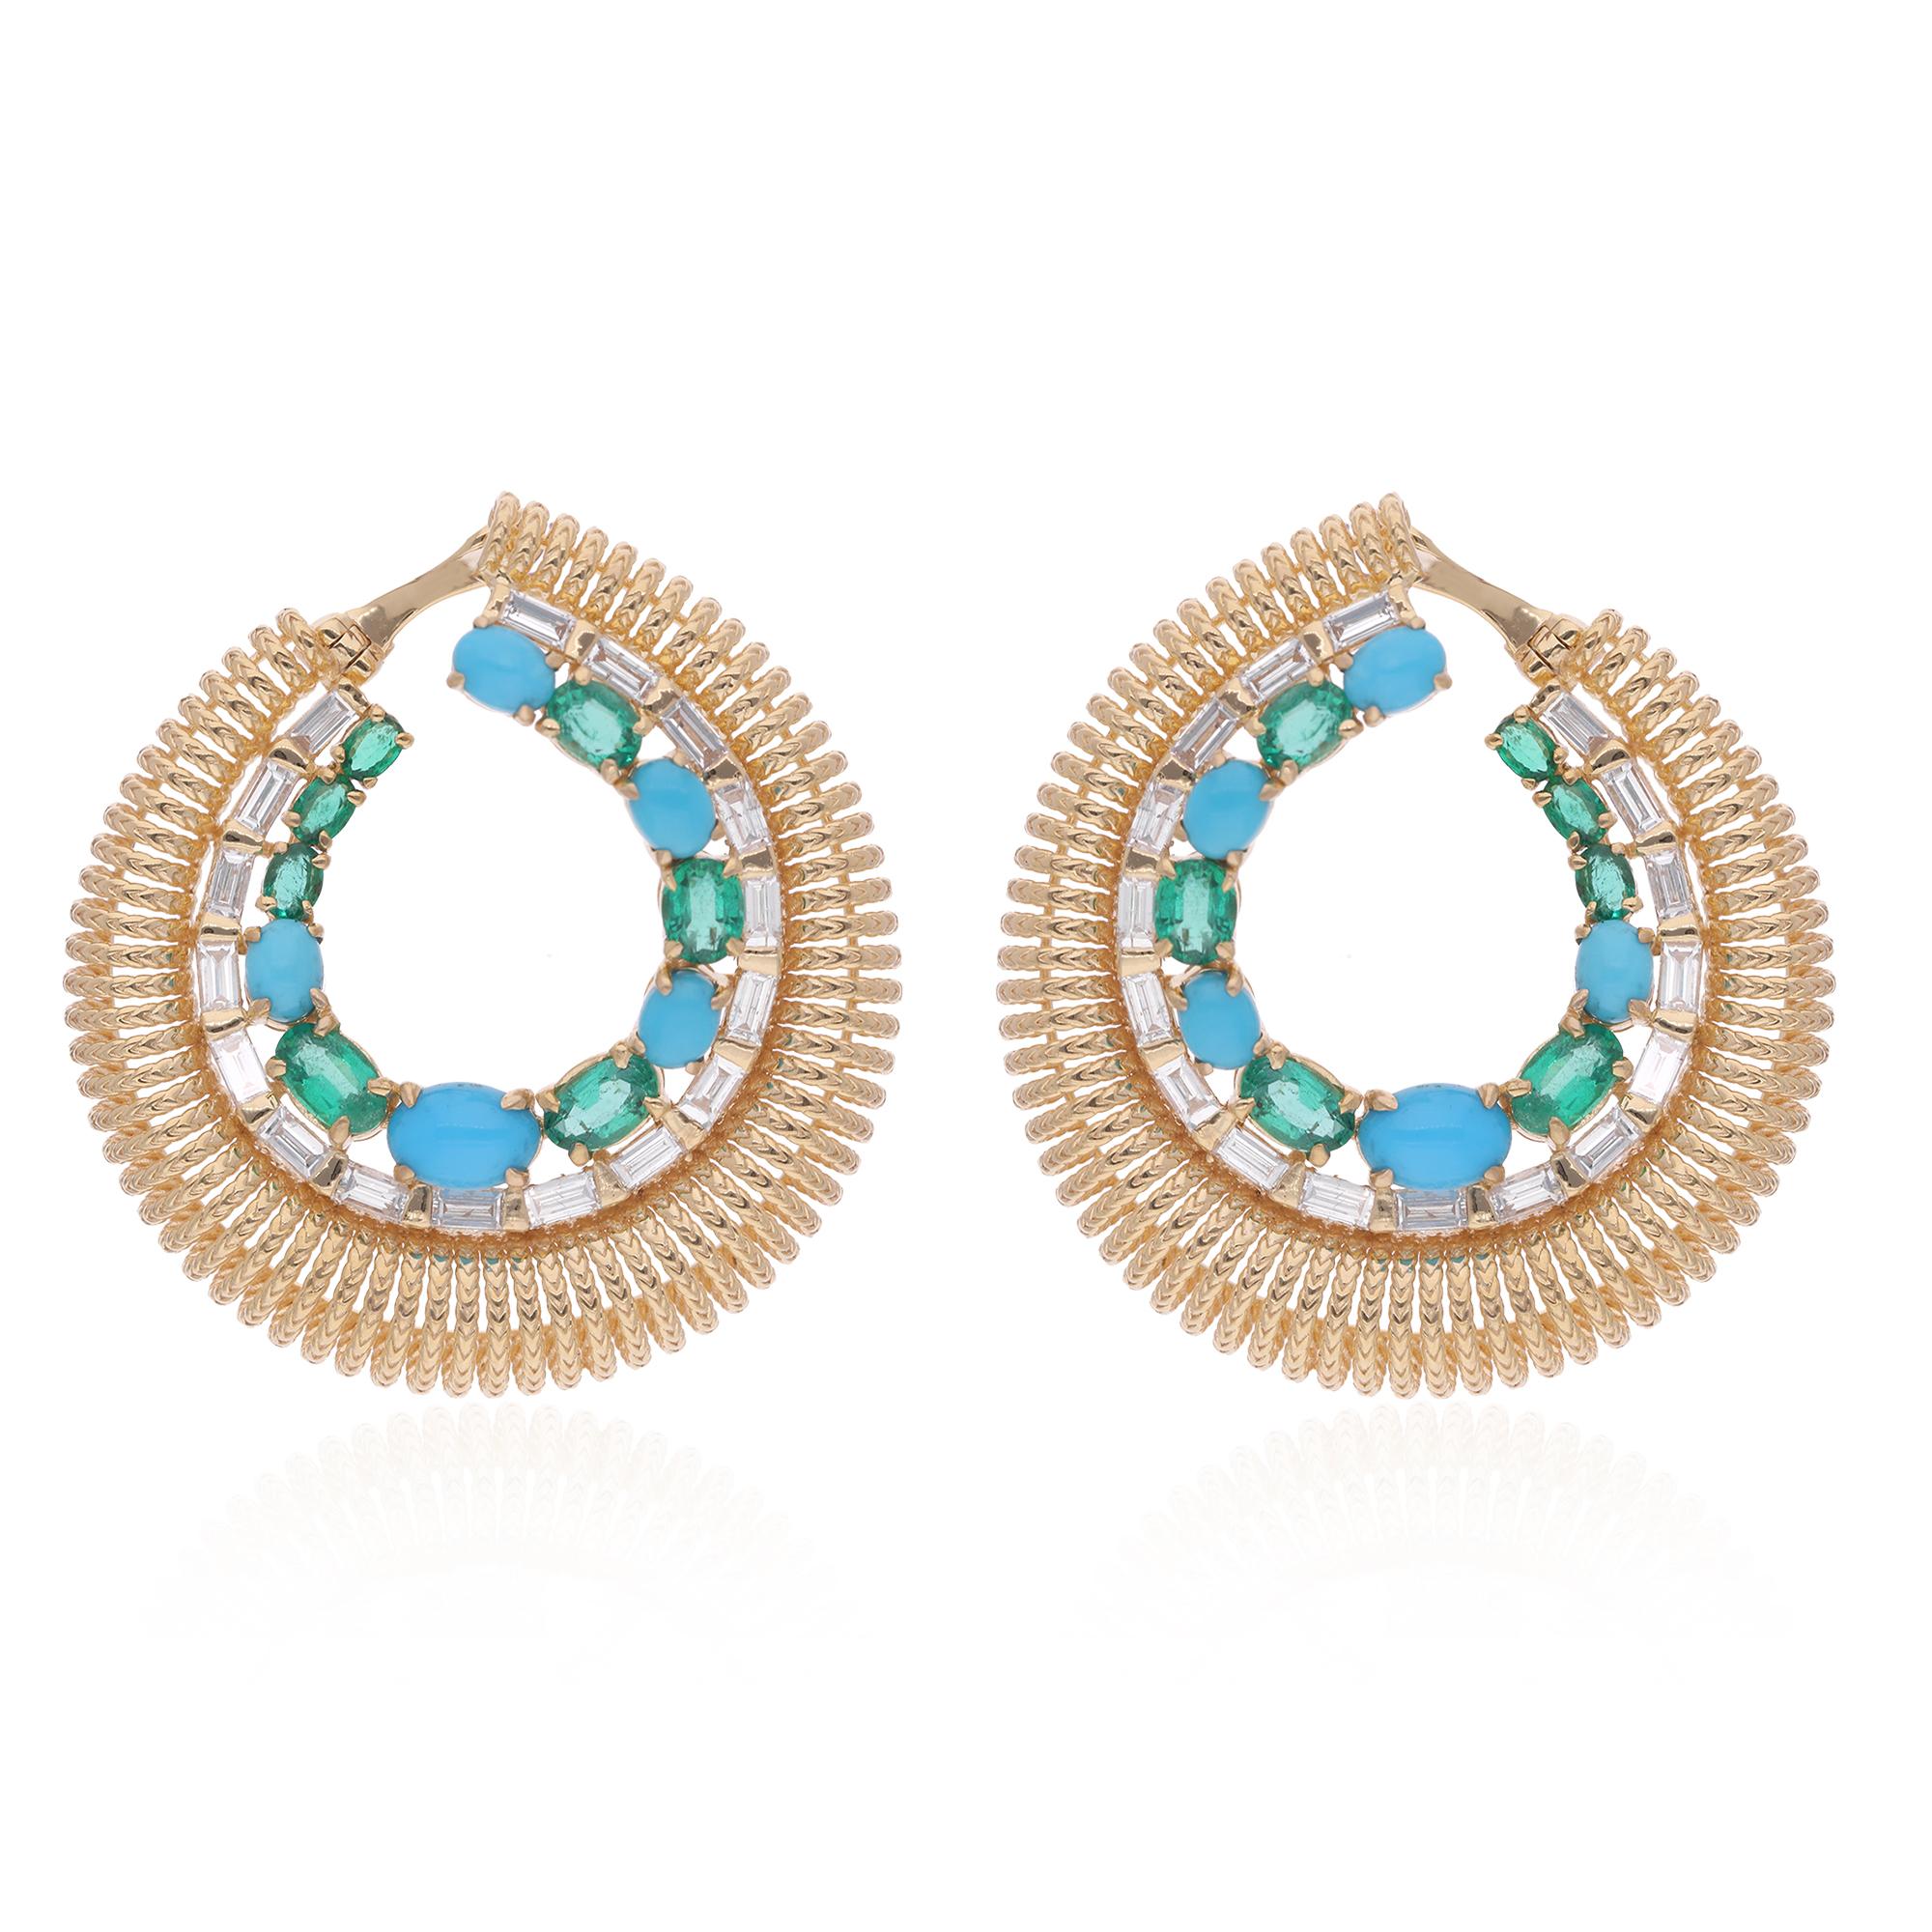 Crafted with precision and attention to detail, the earrings are fashioned in opulent 18 Karat Yellow Gold, adding a warm and rich tone to the design. The yellow gold setting provides the perfect backdrop for the turquoise and diamonds, creating a